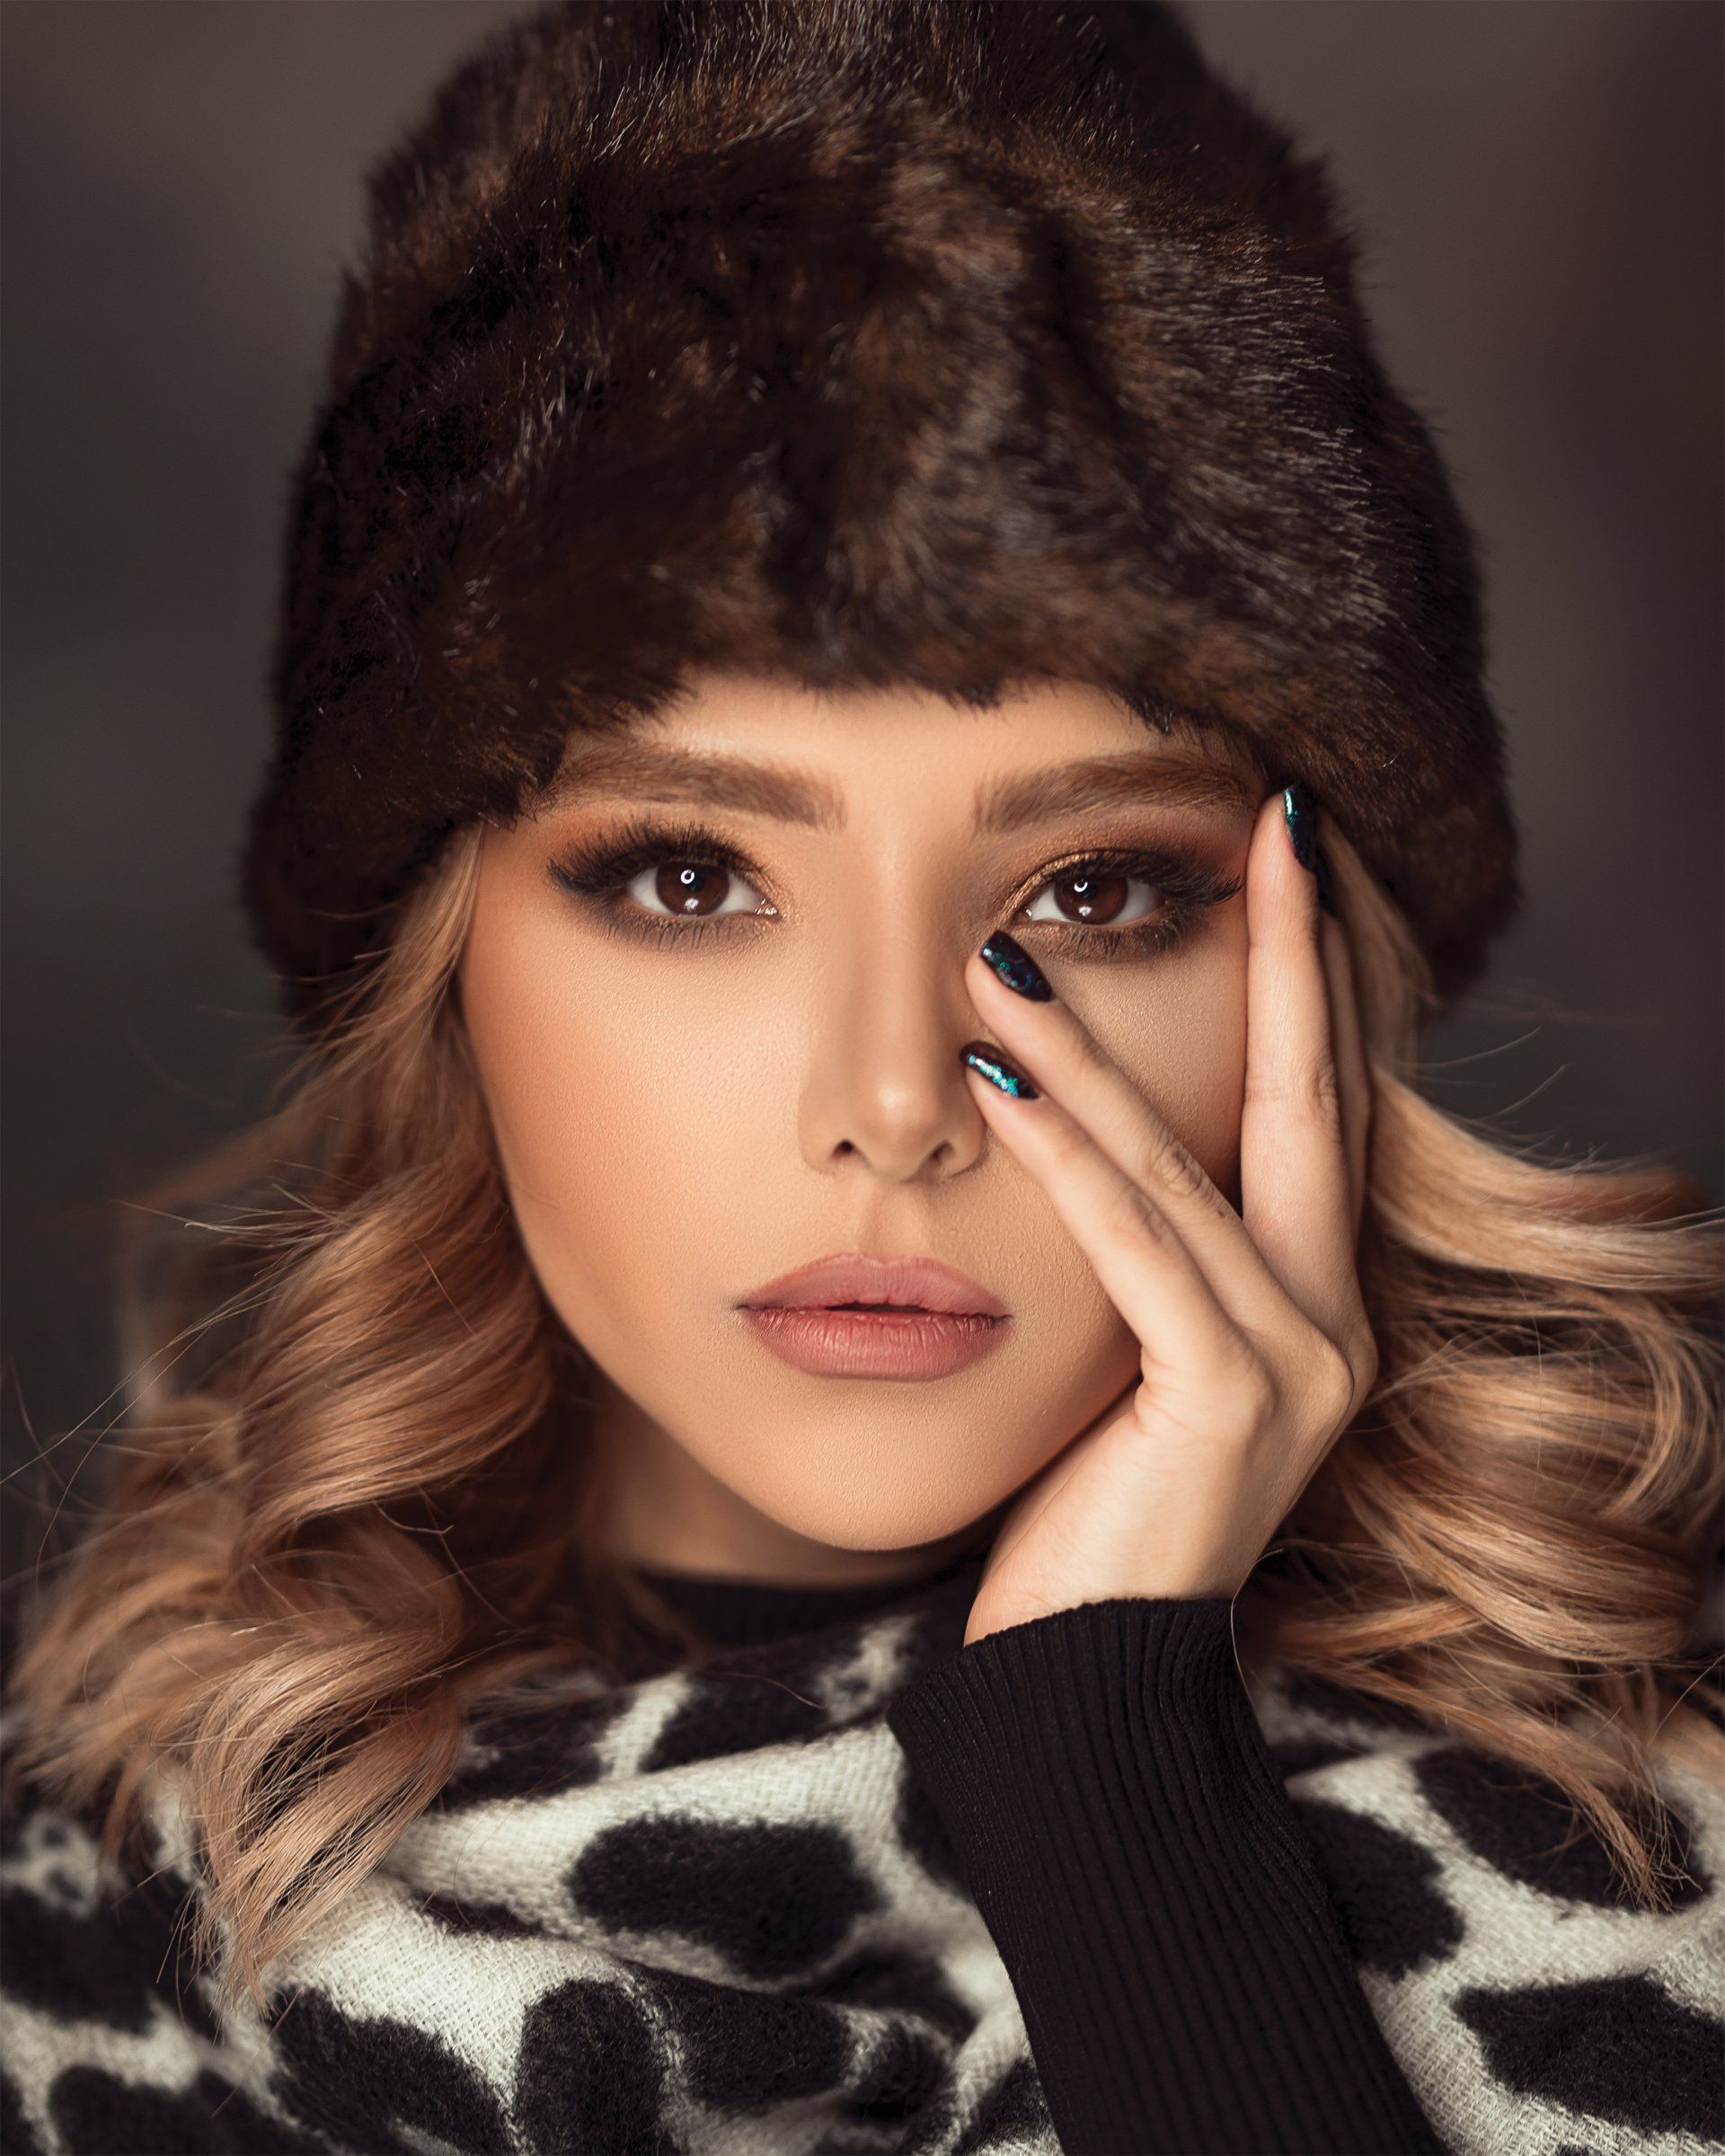 A woman wearing a fur hat and a leopard print sweater is covering her face with her hand.